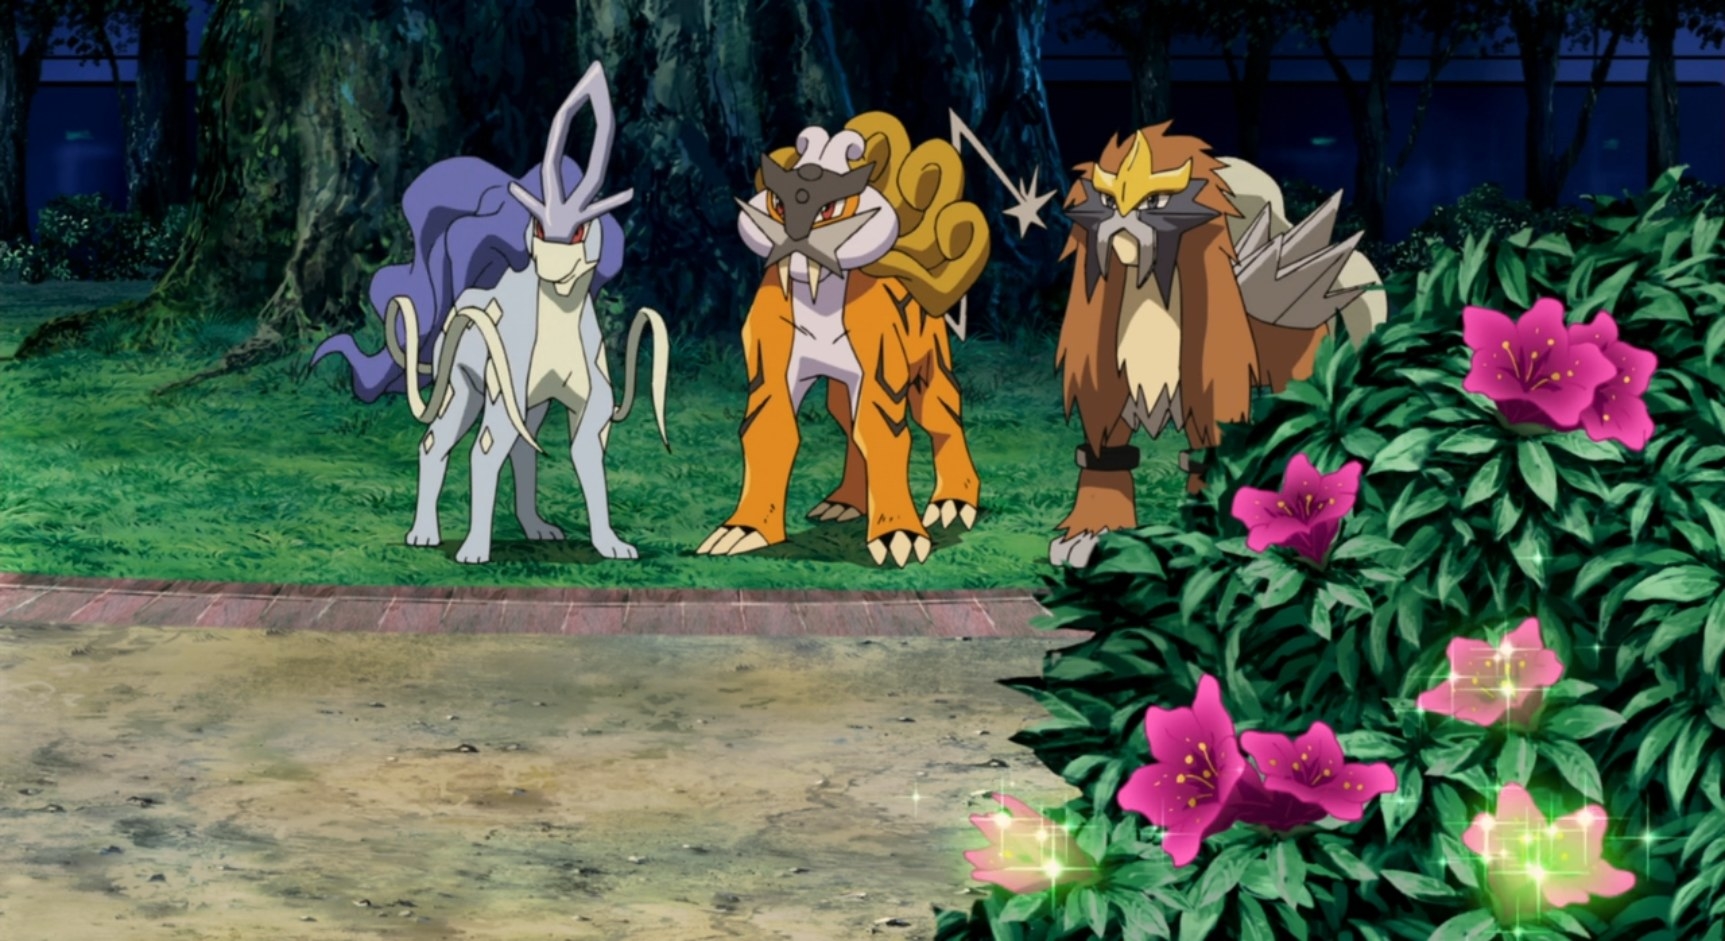 From left to right: shiny Suicune, Raikou, and Entei stand calmly in a garden